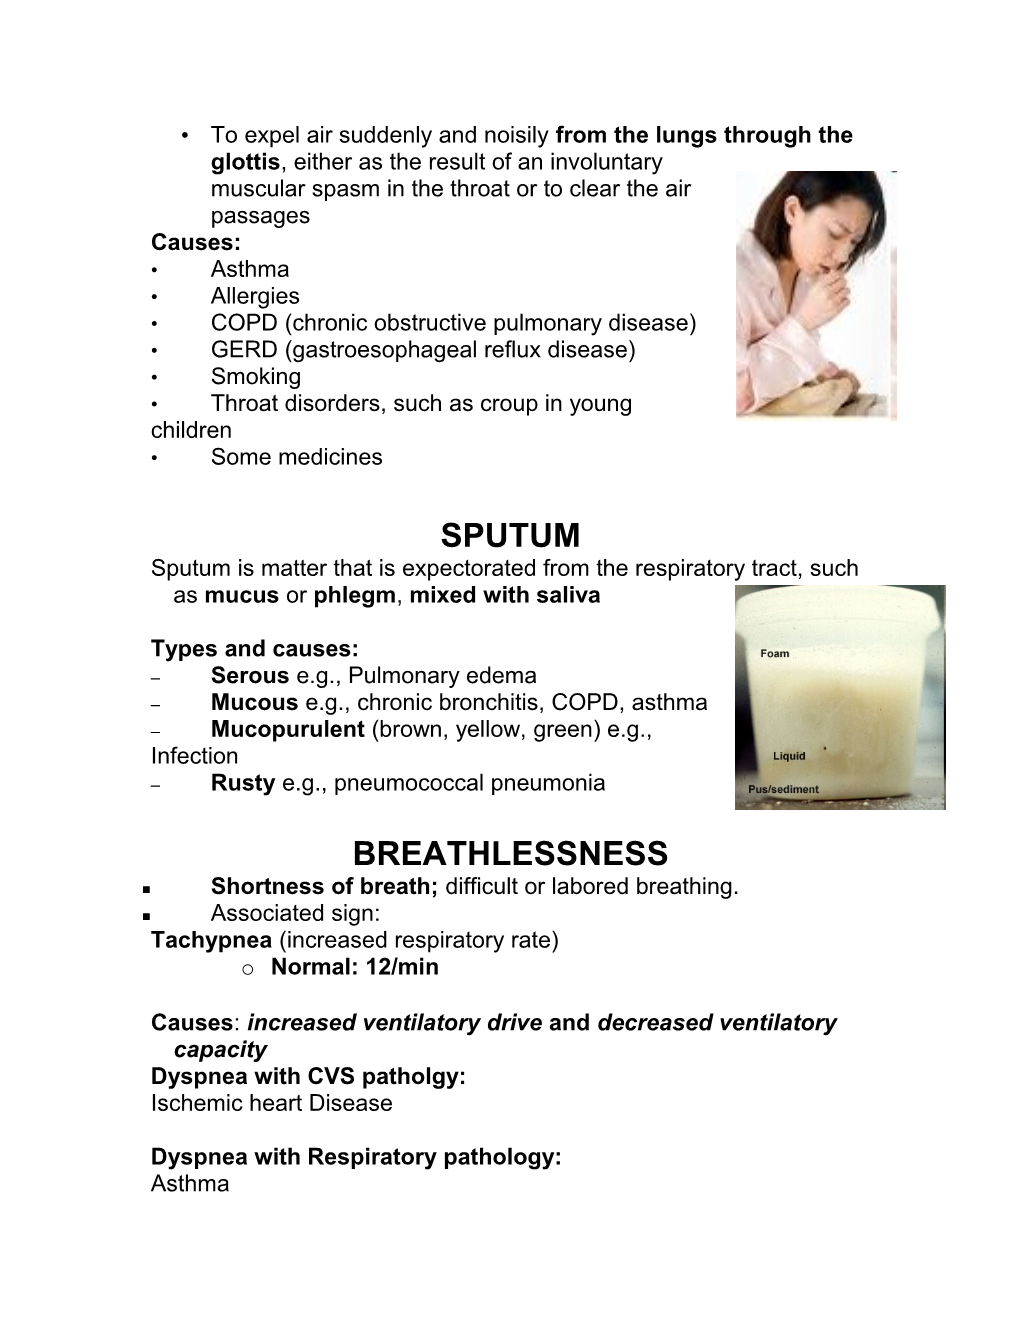 Signs and Symptoms of Respiratory Diseases